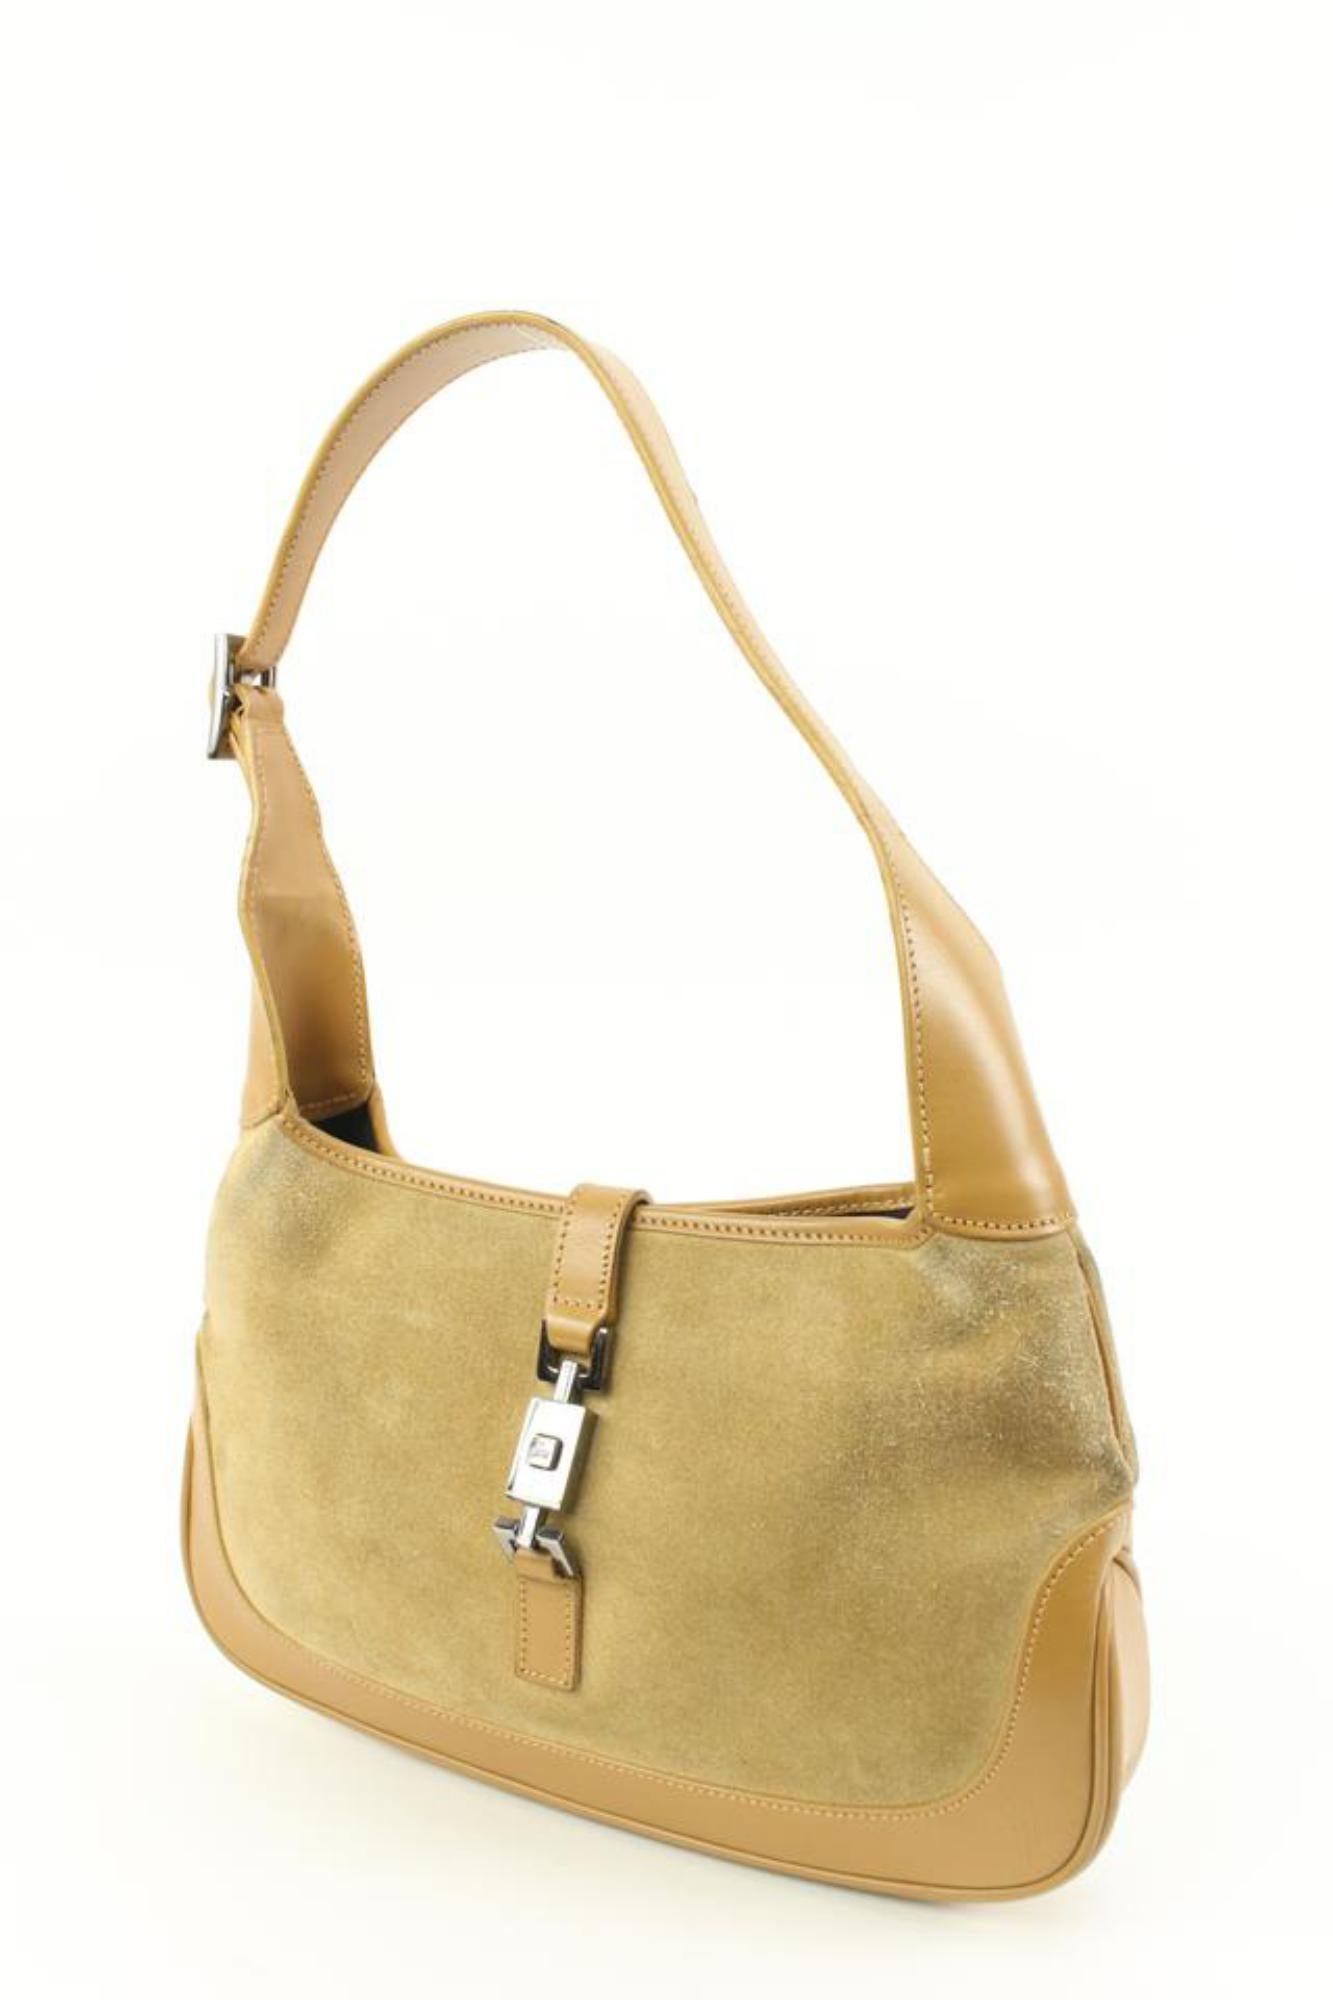 Gucci Beige Jackie-O Hobo Bag 85g323s
Date Code/Serial Number: 001-3735 002058
Made In: Italy
Measurements: Length:  10.5